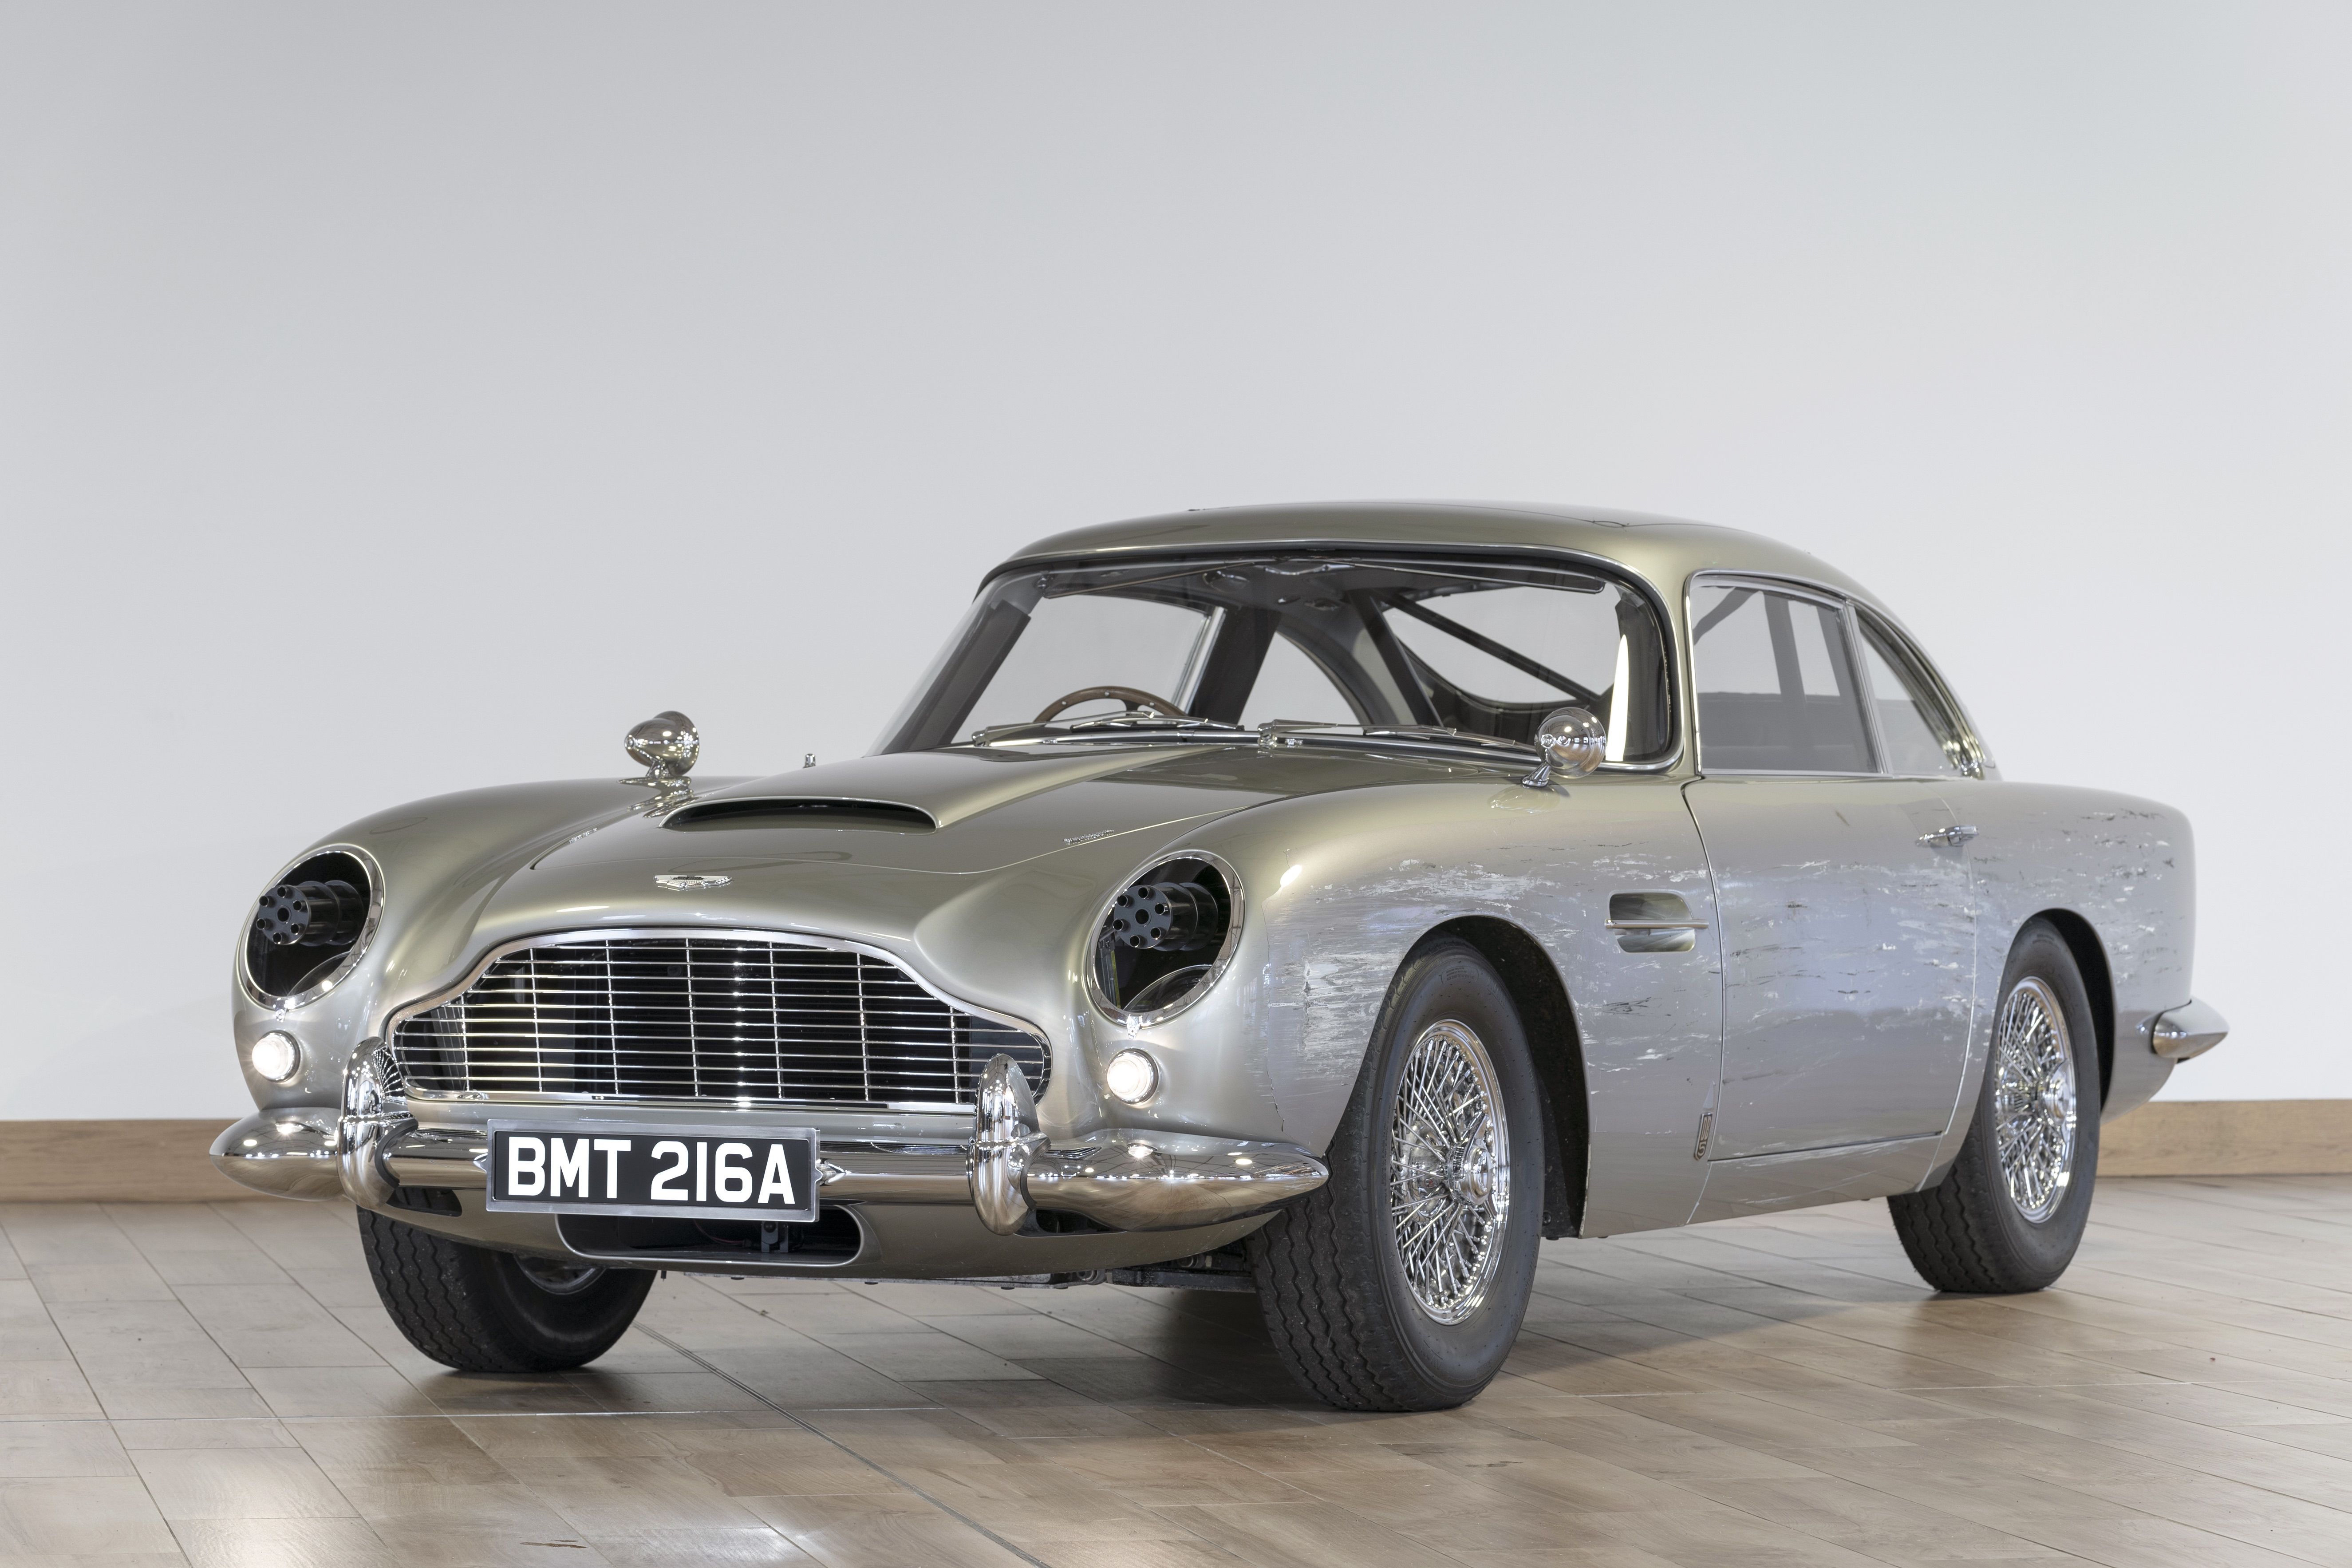 Aston Martin DB5 Stunt Car From No Time To Die Brings $3.2M At Auction